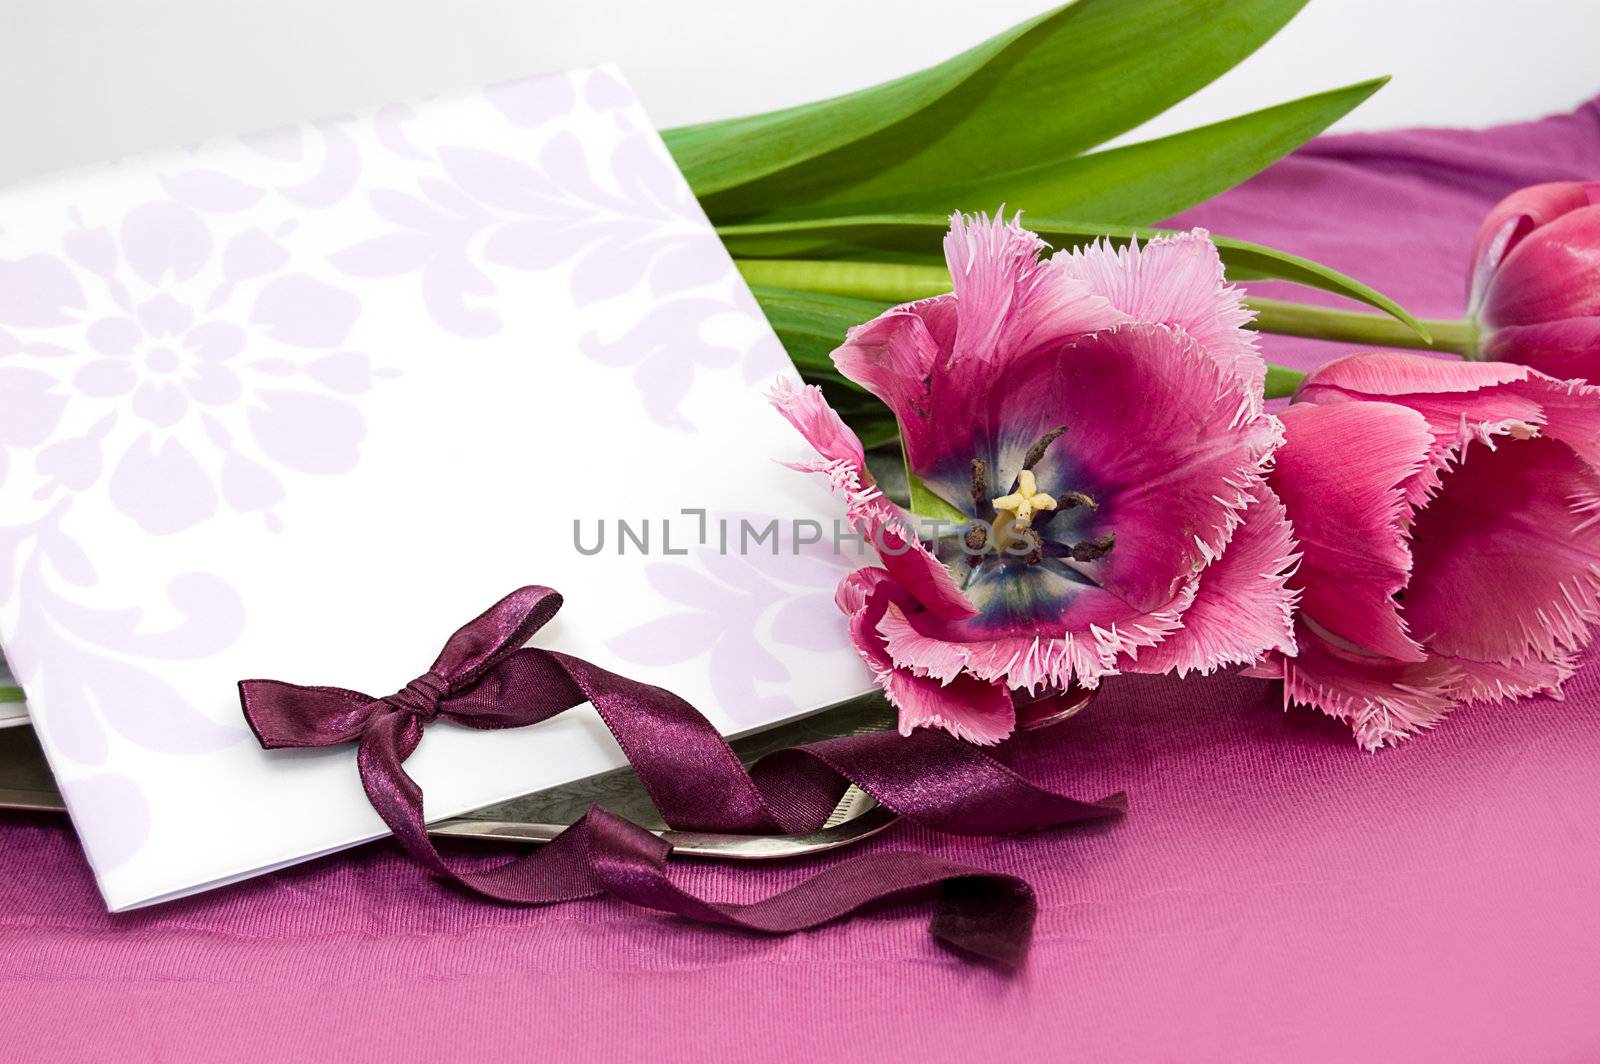 Greeting card with violet tulips by Angel_a